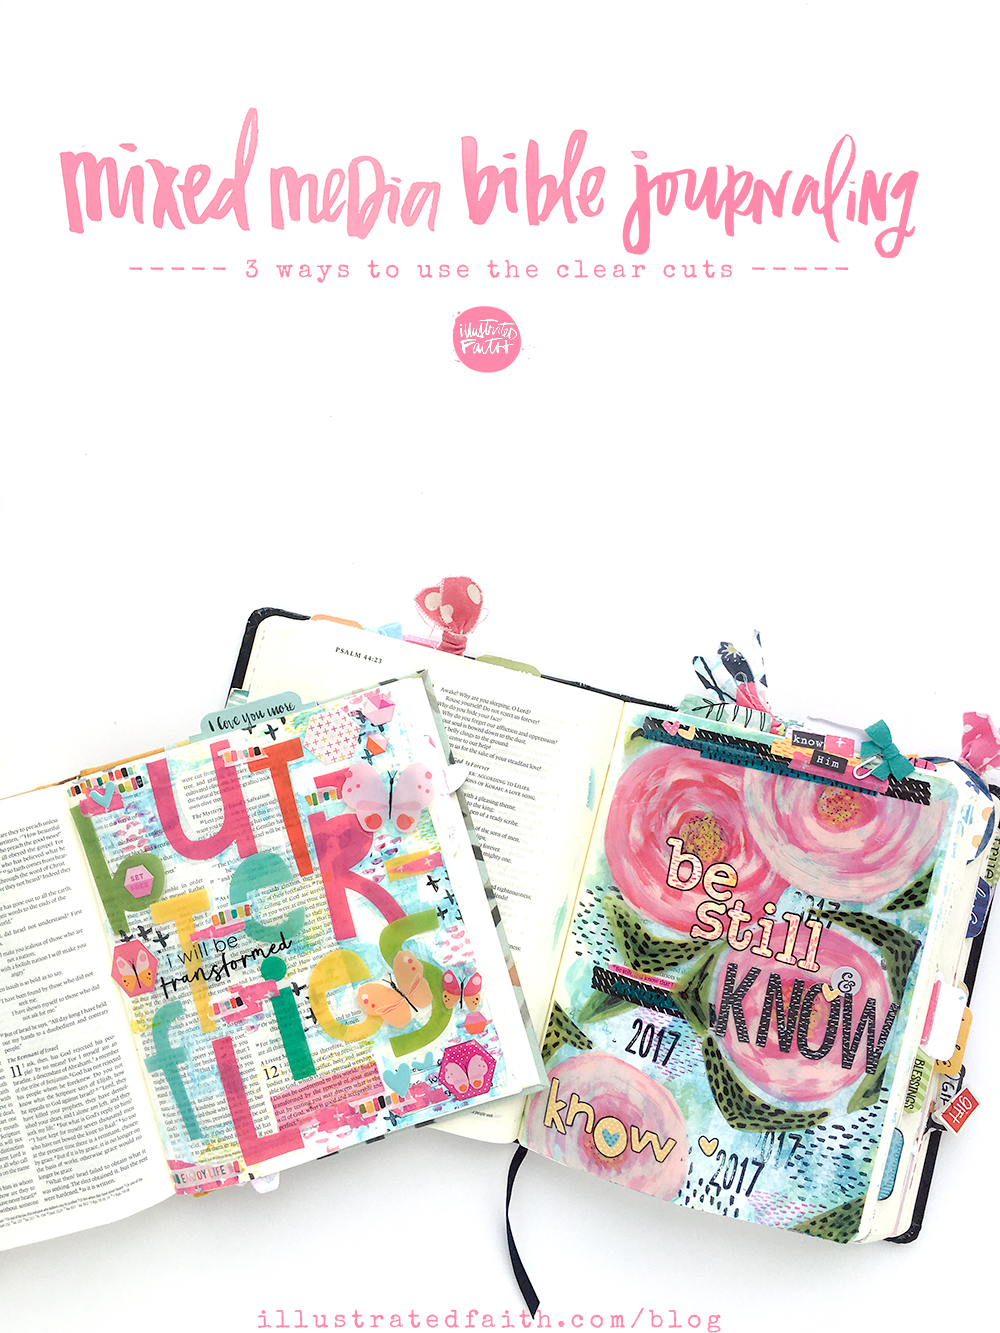 mixed media bible journaling tutorial by Heather Greenwood | 3 ways to use clear cuts in your Bible Journaling